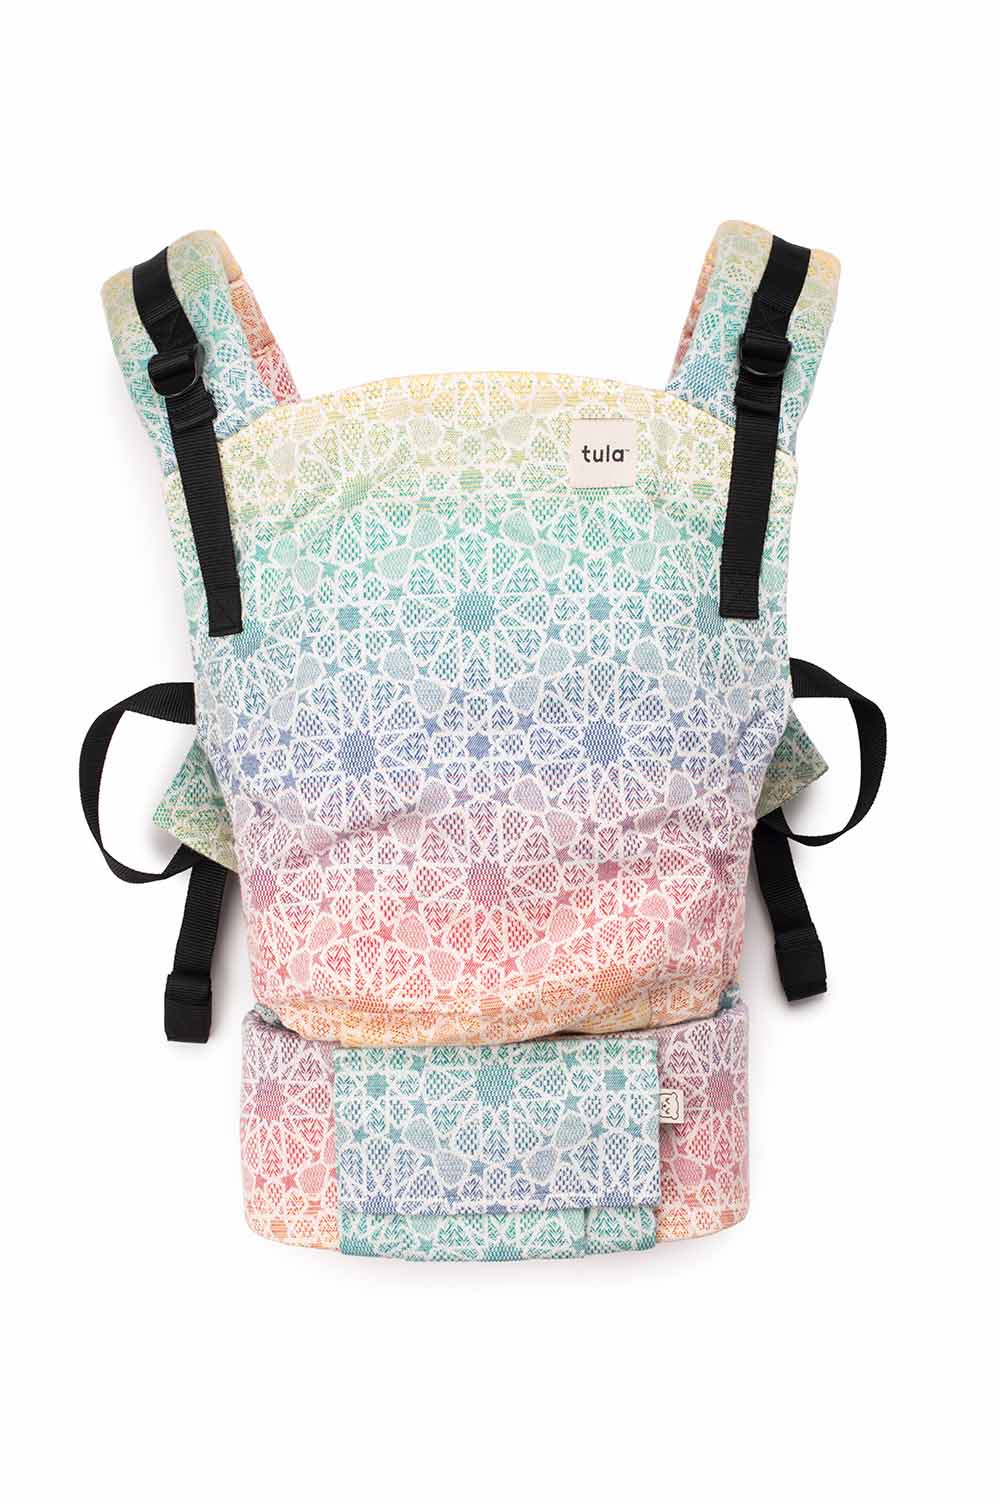 Andaluz Rainbow - Signature Woven Free-to-Grow Baby Carrier